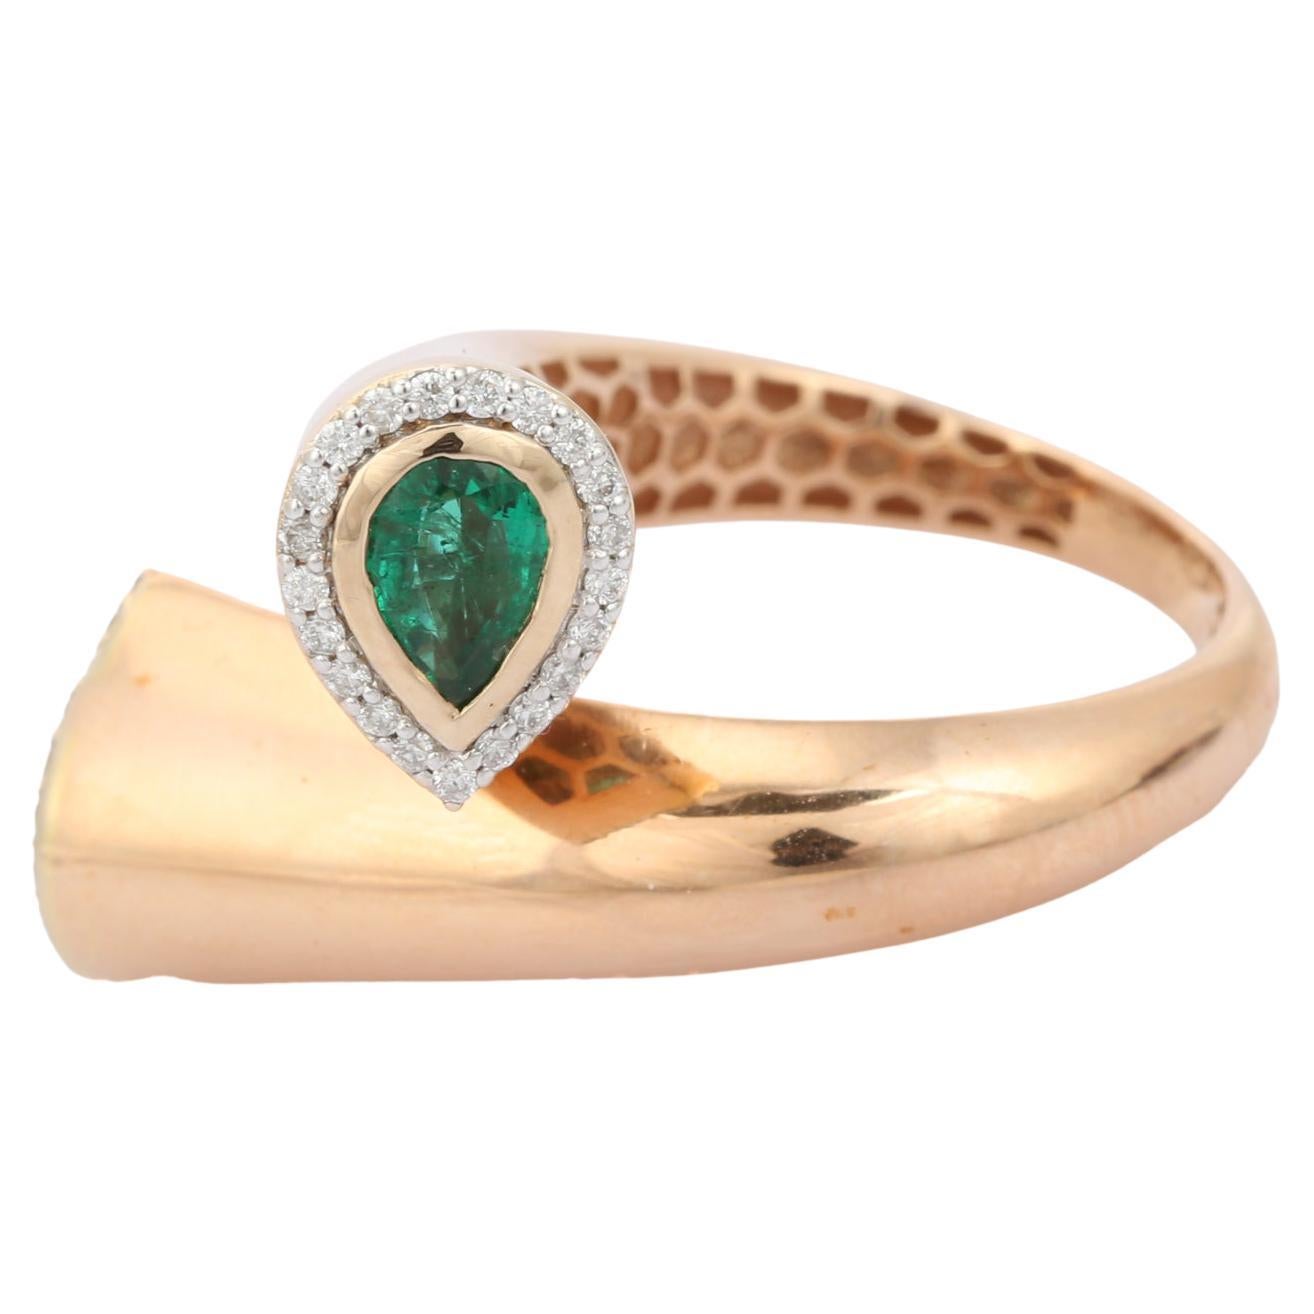 Unique 18k Solid Yellow Gold Emerald and Diamond Bypass Ring